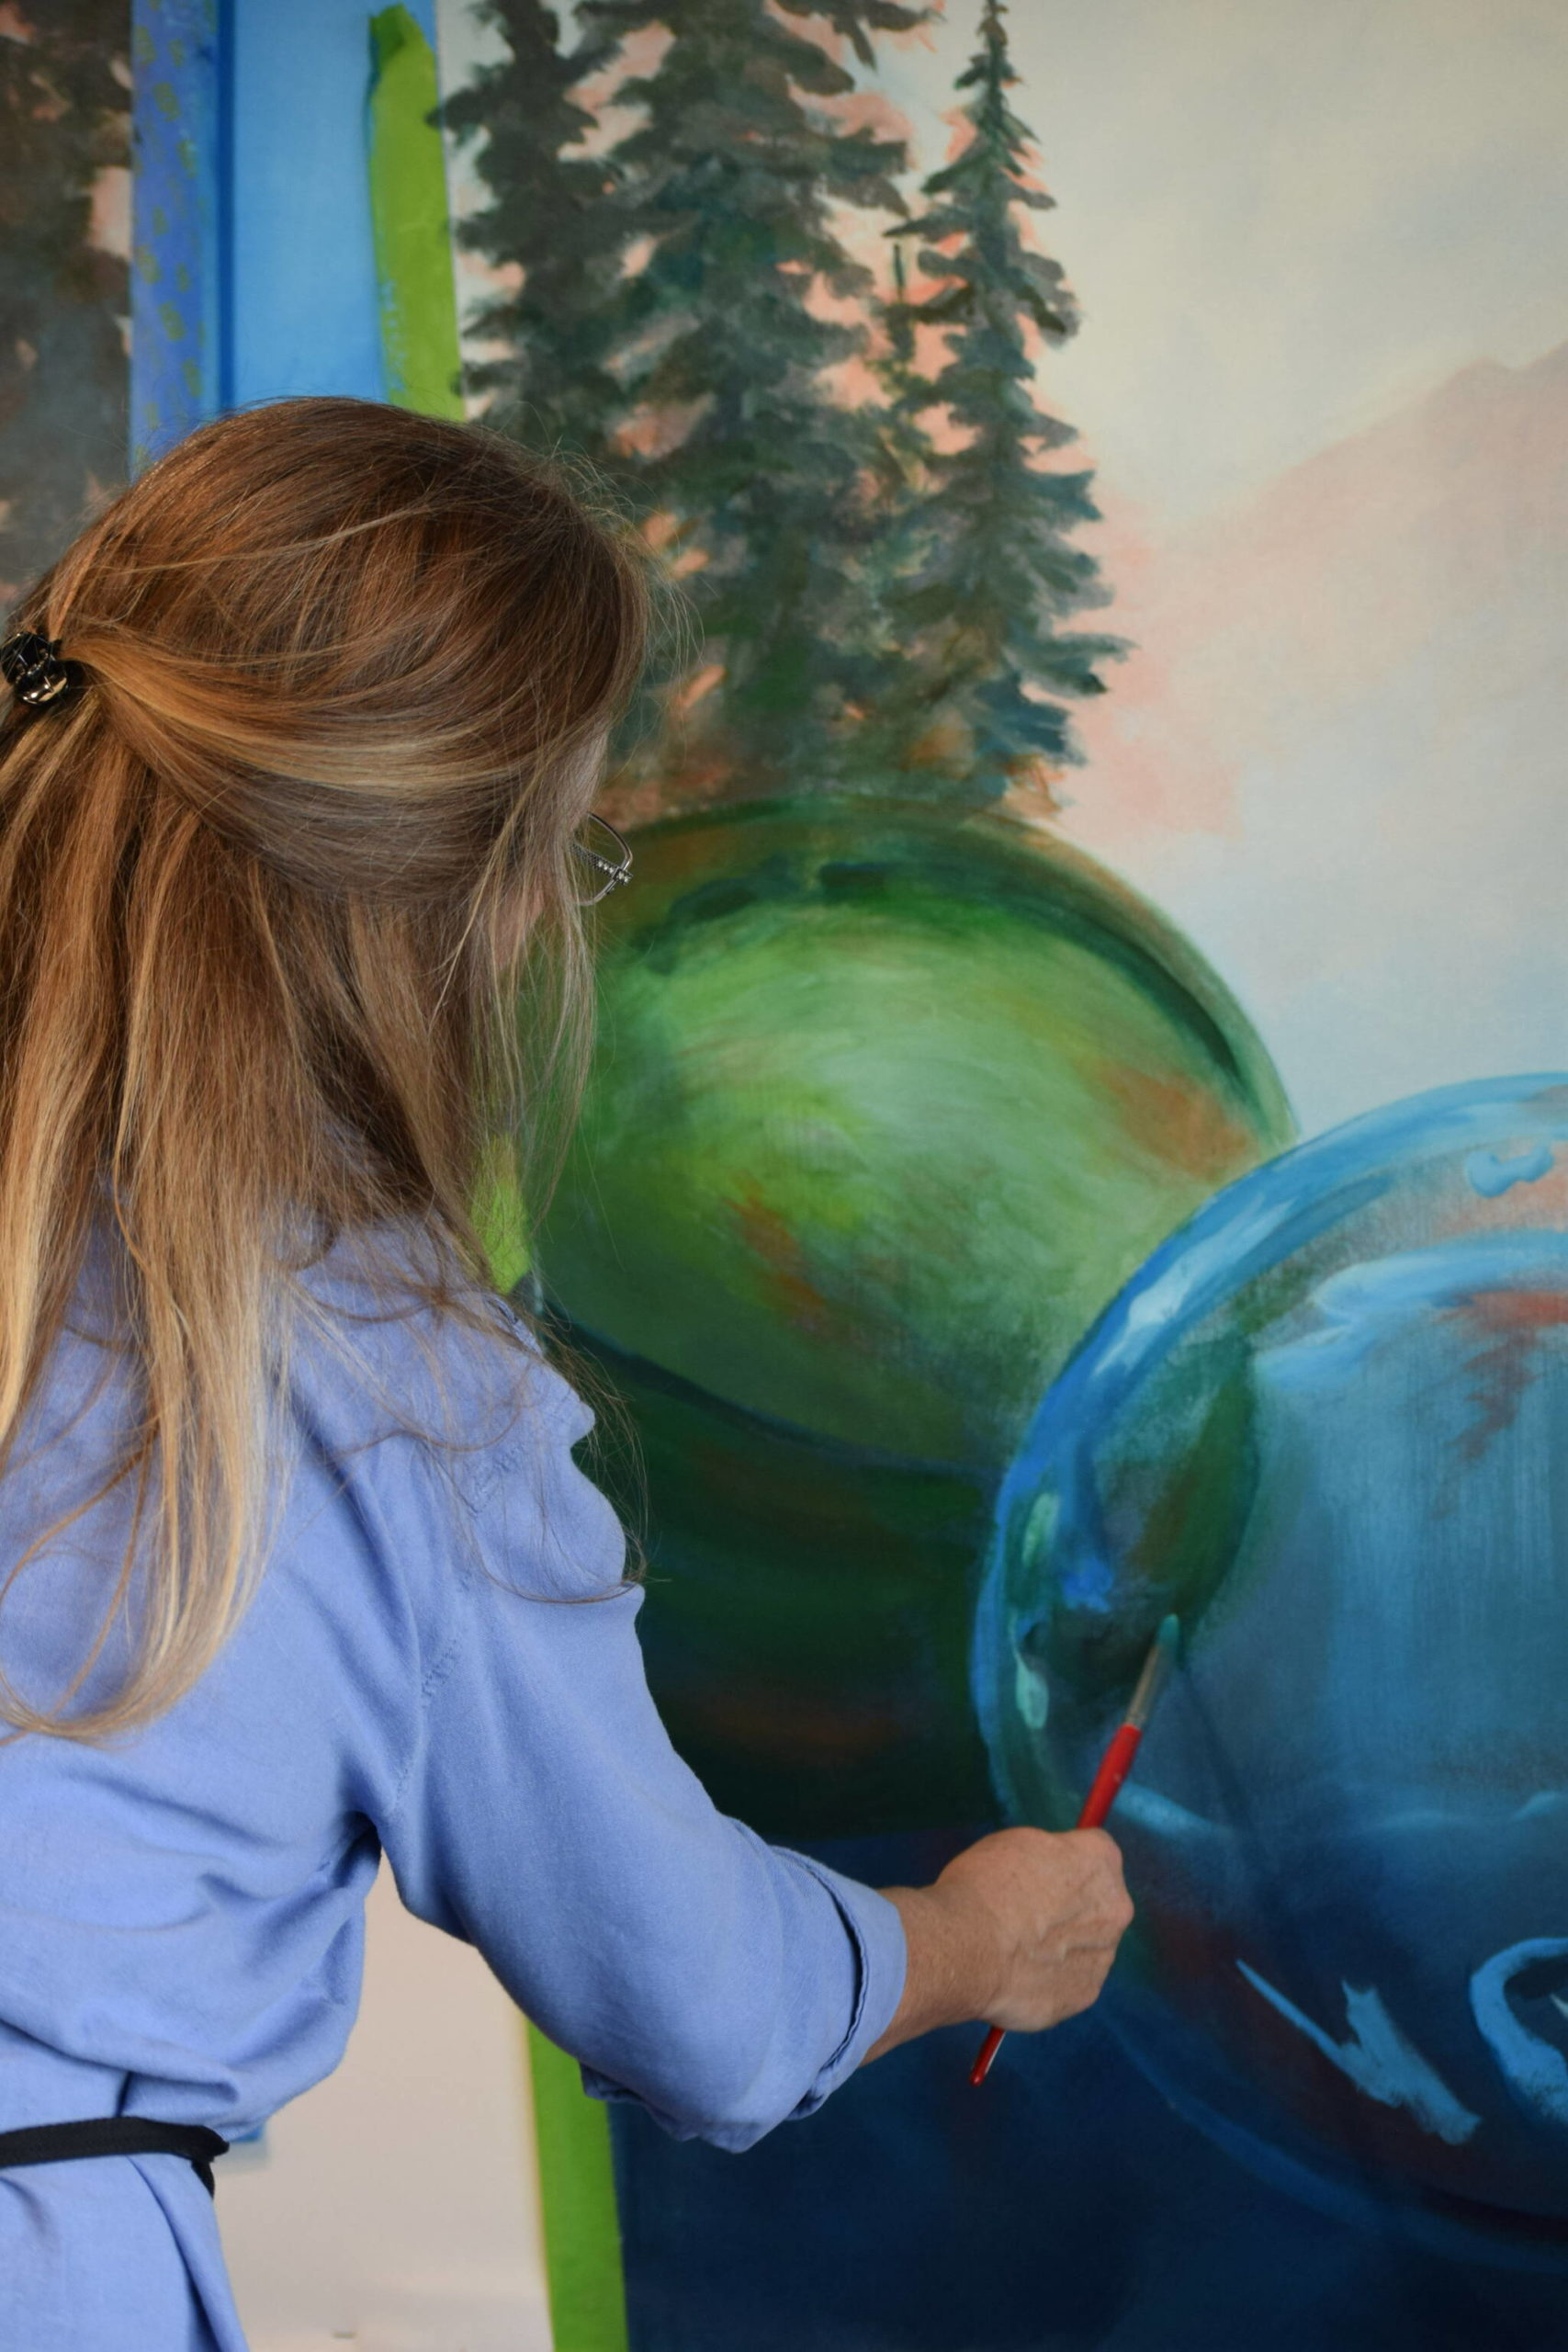 Melinda Hershberger works on her installation for the Kenai Art Center’s collaborative mural project on Wednesday, Nov. 3, 2021. (Camille Botello/Peninsula Clarion)